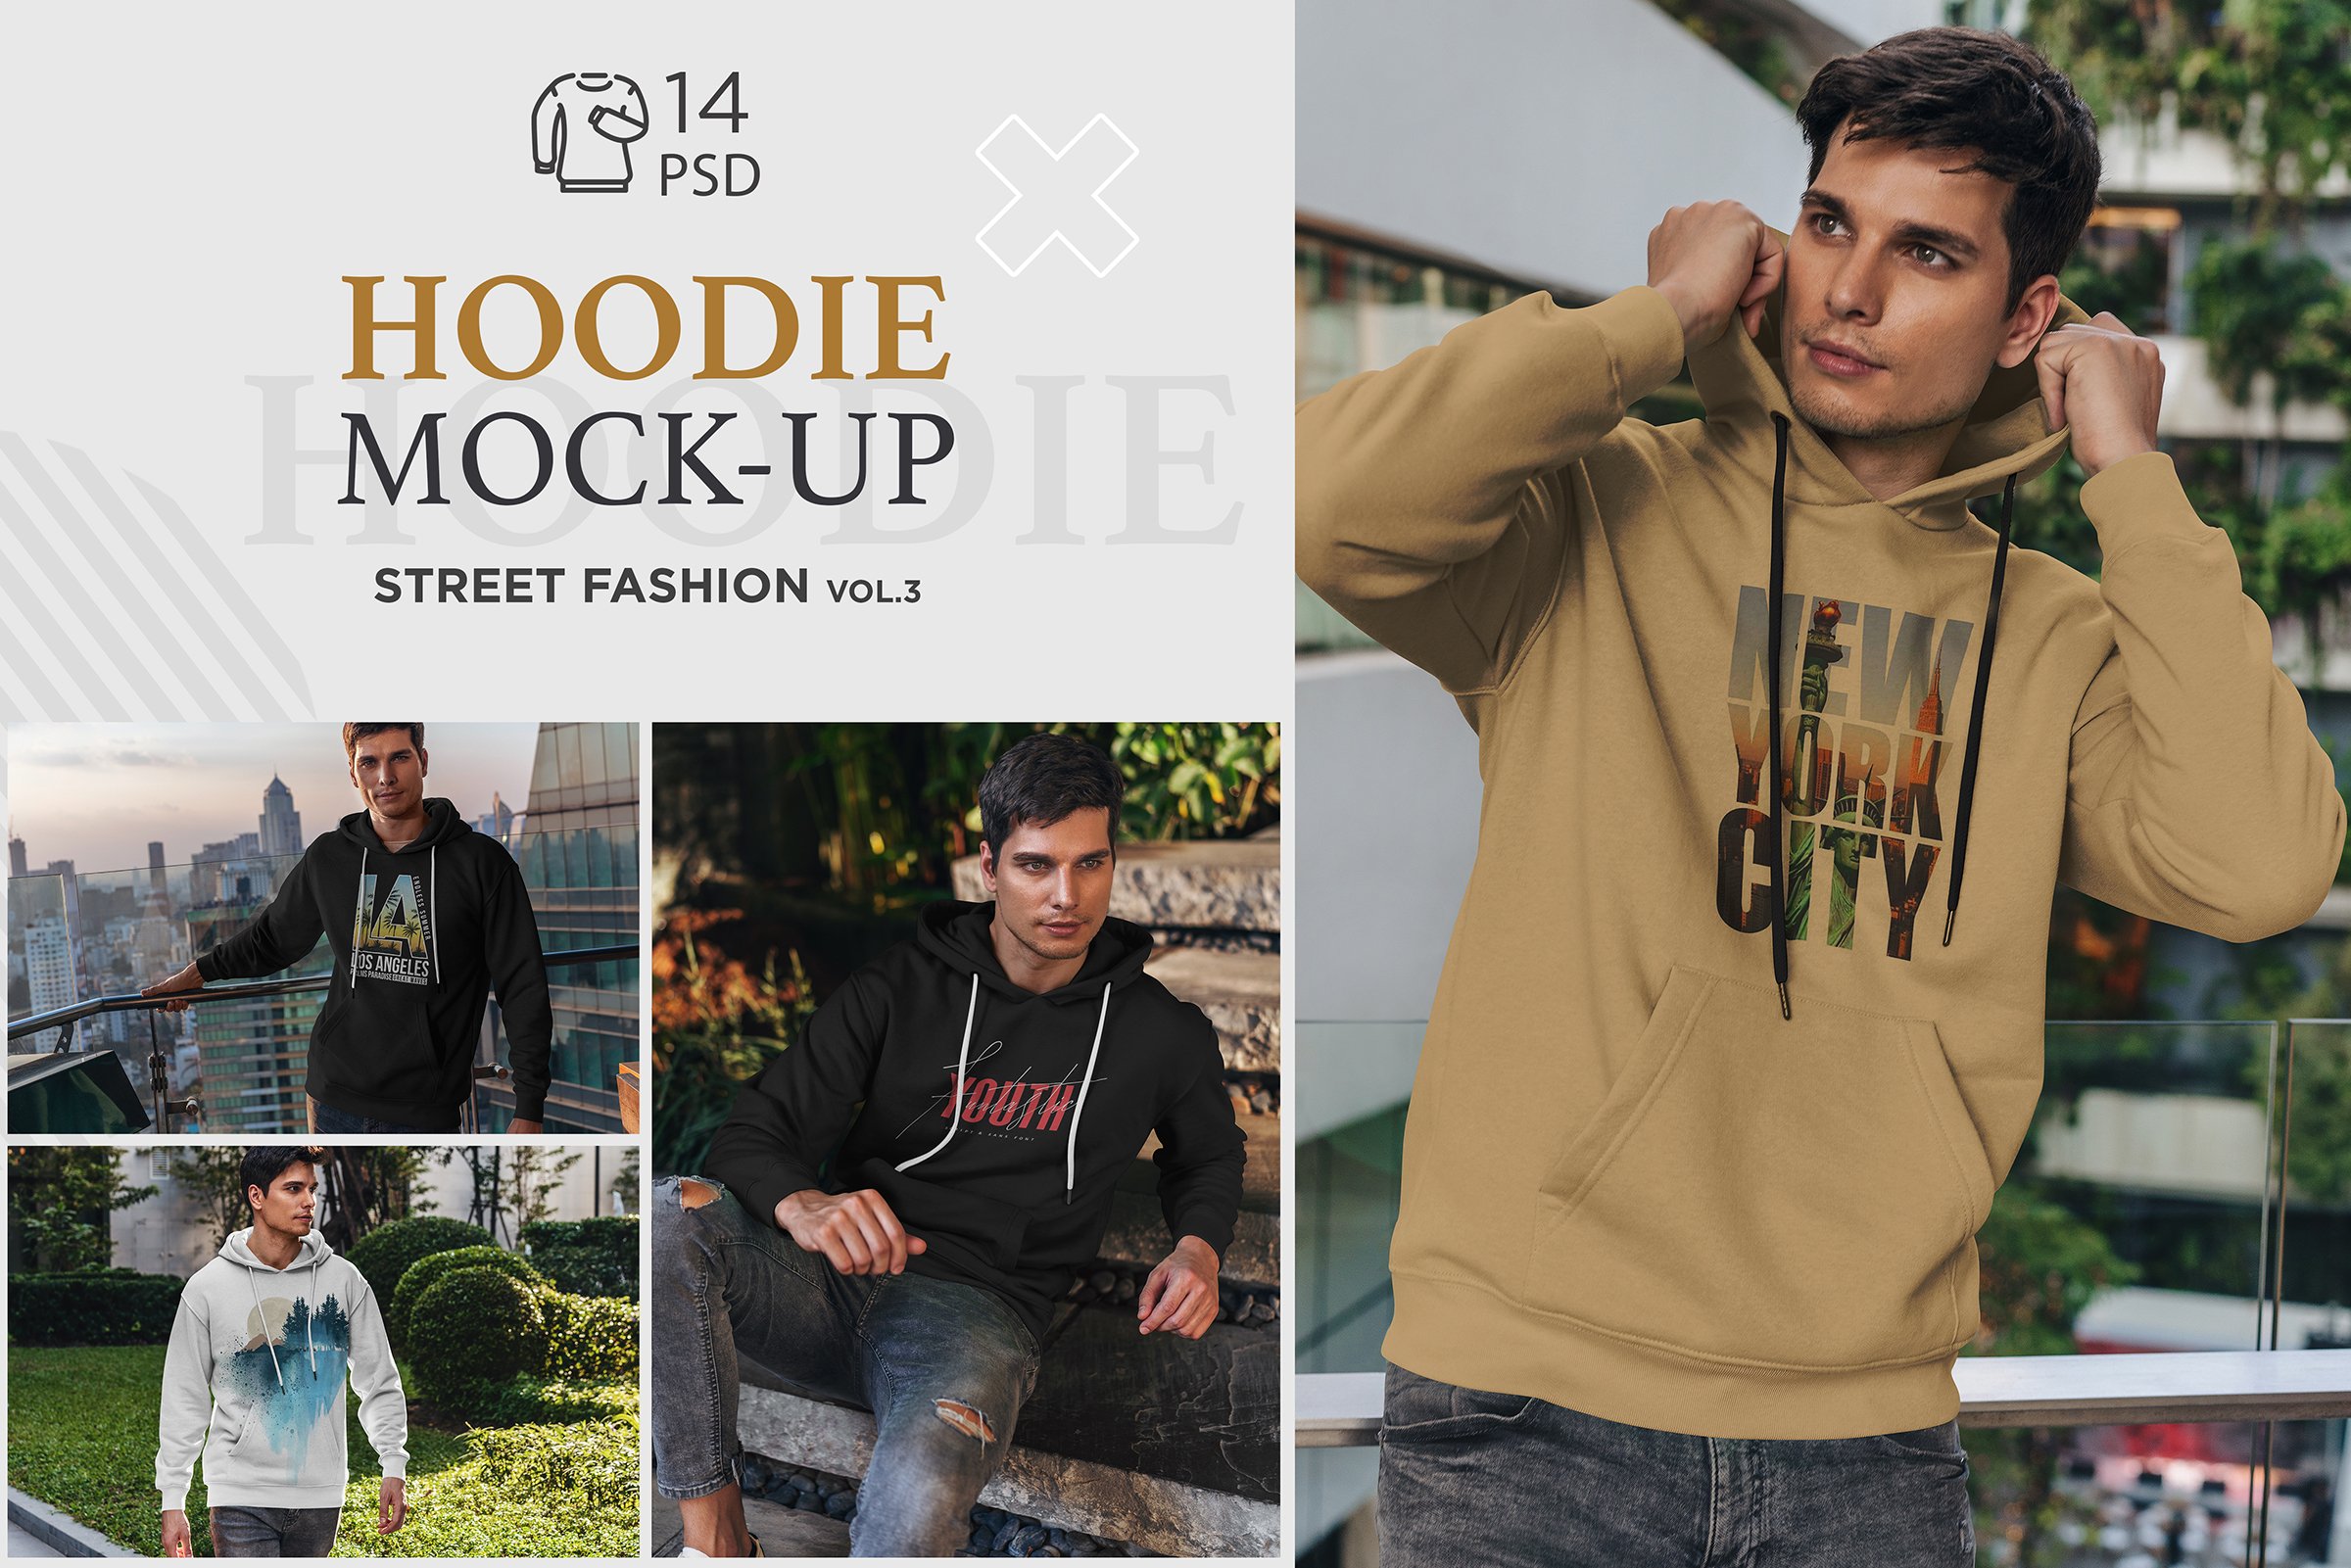 Hoodie Mock-Up Street Fashion vol.3 cover image.